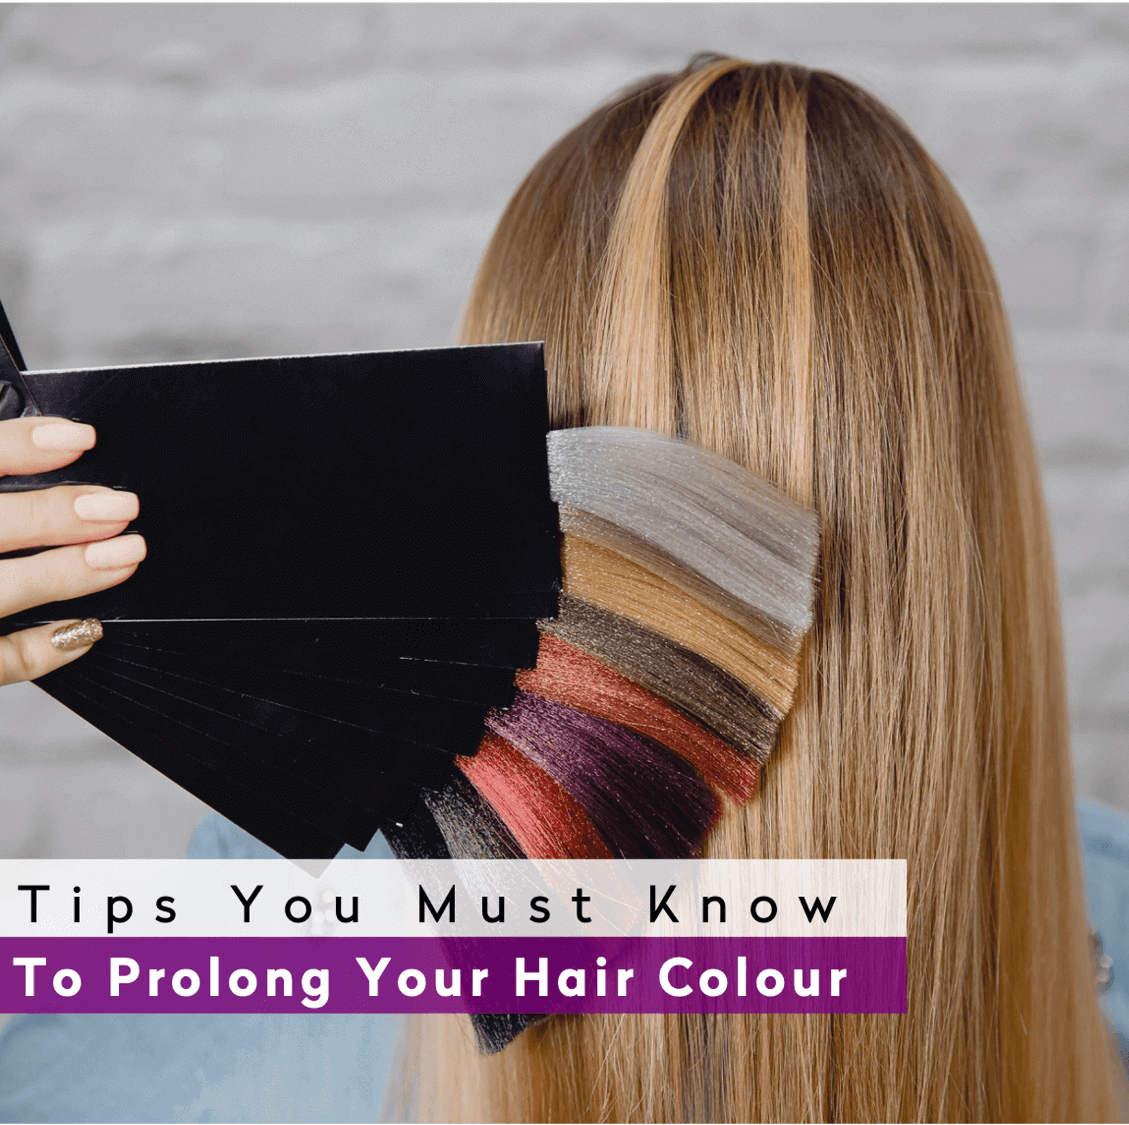 Why Does My Hair Colour Fade So Quickly? Tips to Prolong Your Hair Colour |  Top Leading Hair Salon in Singapore and Orchard | Chez Vous